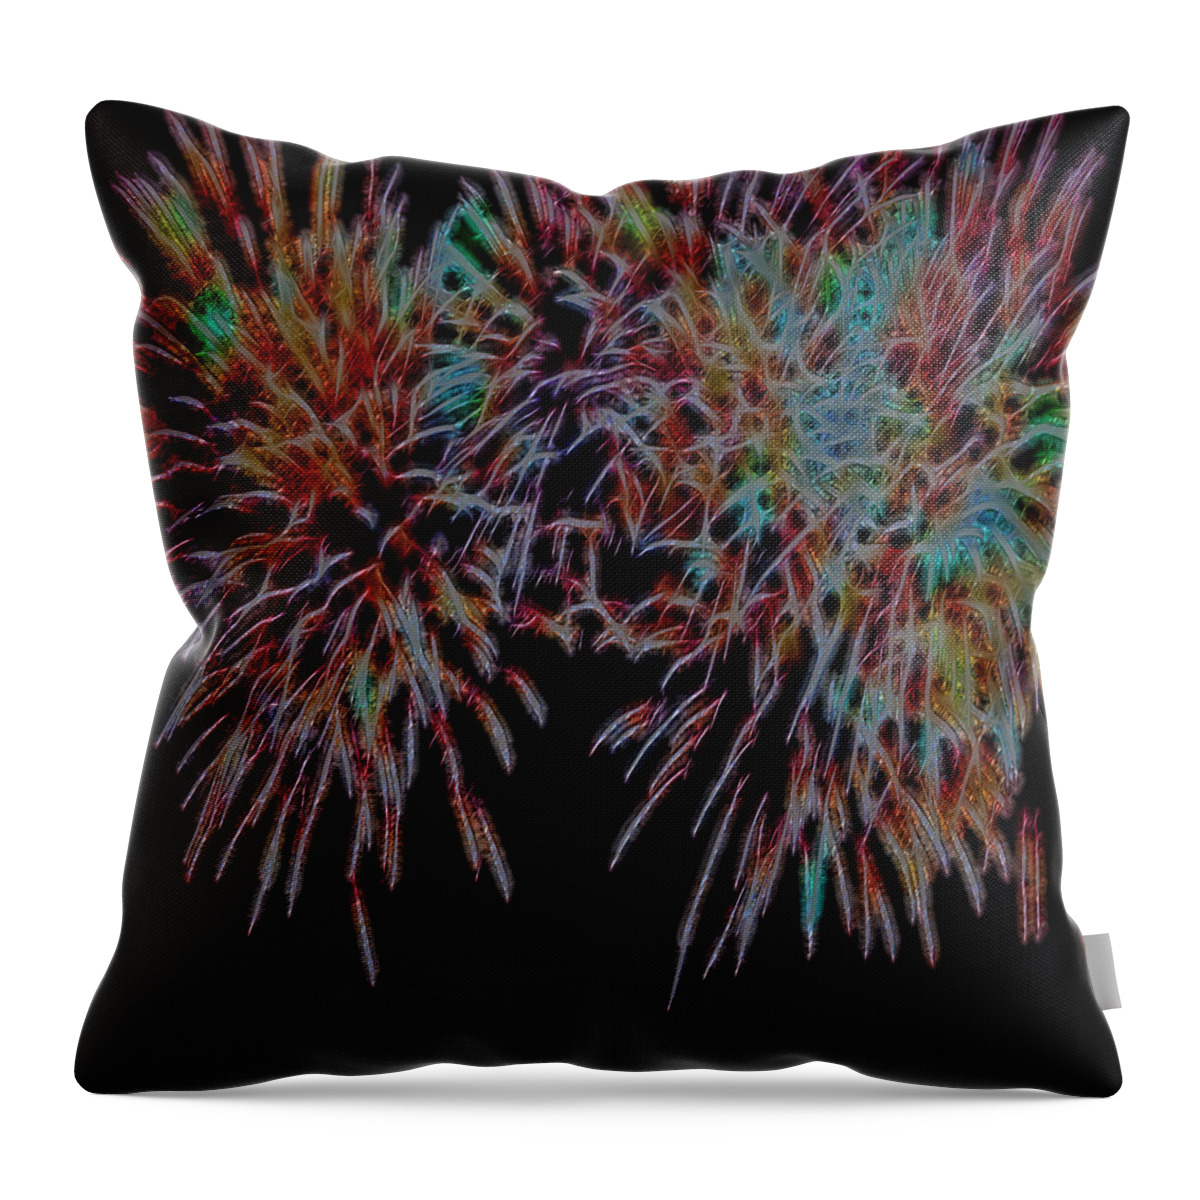 Fireworks Throw Pillow featuring the digital art Fireworks abstract by Cathy Anderson